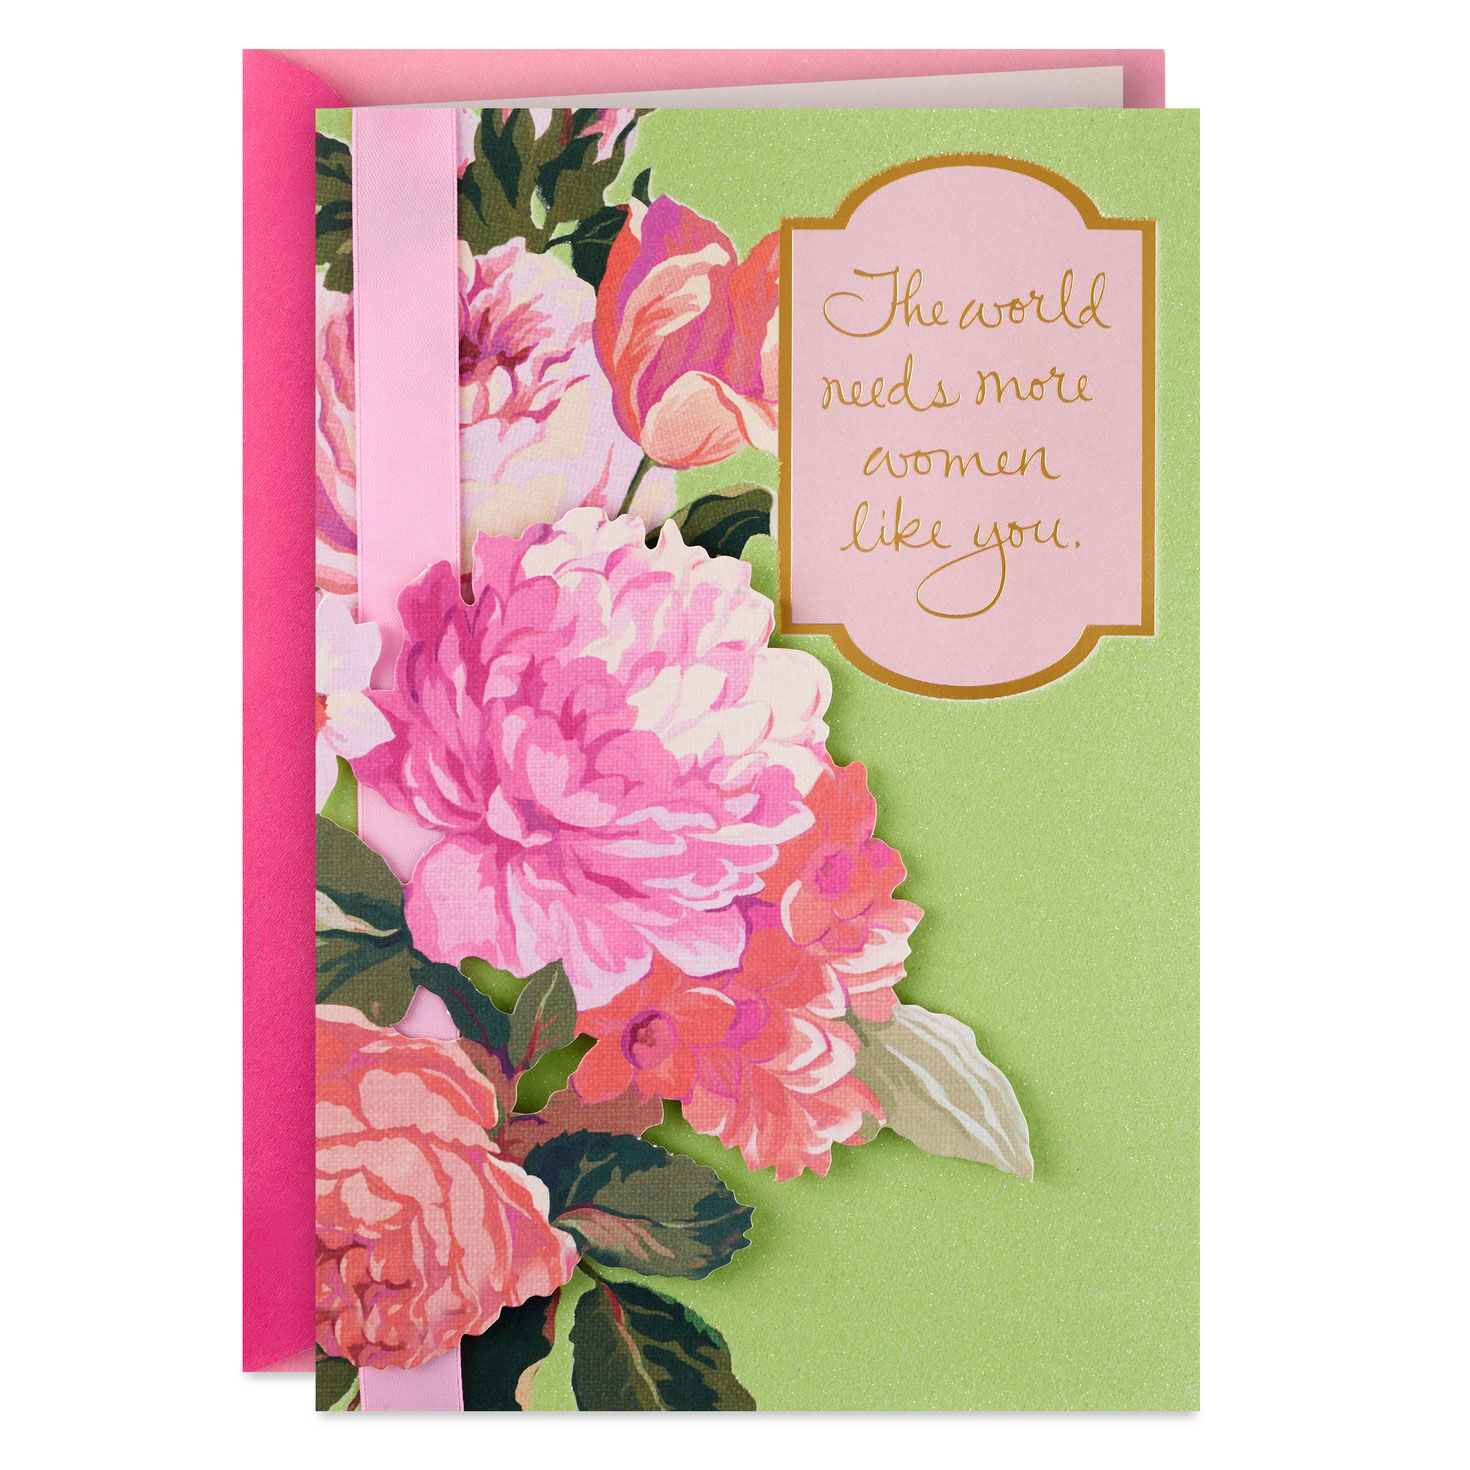 The World Needs More Women Like You Birthday Card for only USD 7.59 | Hallmark